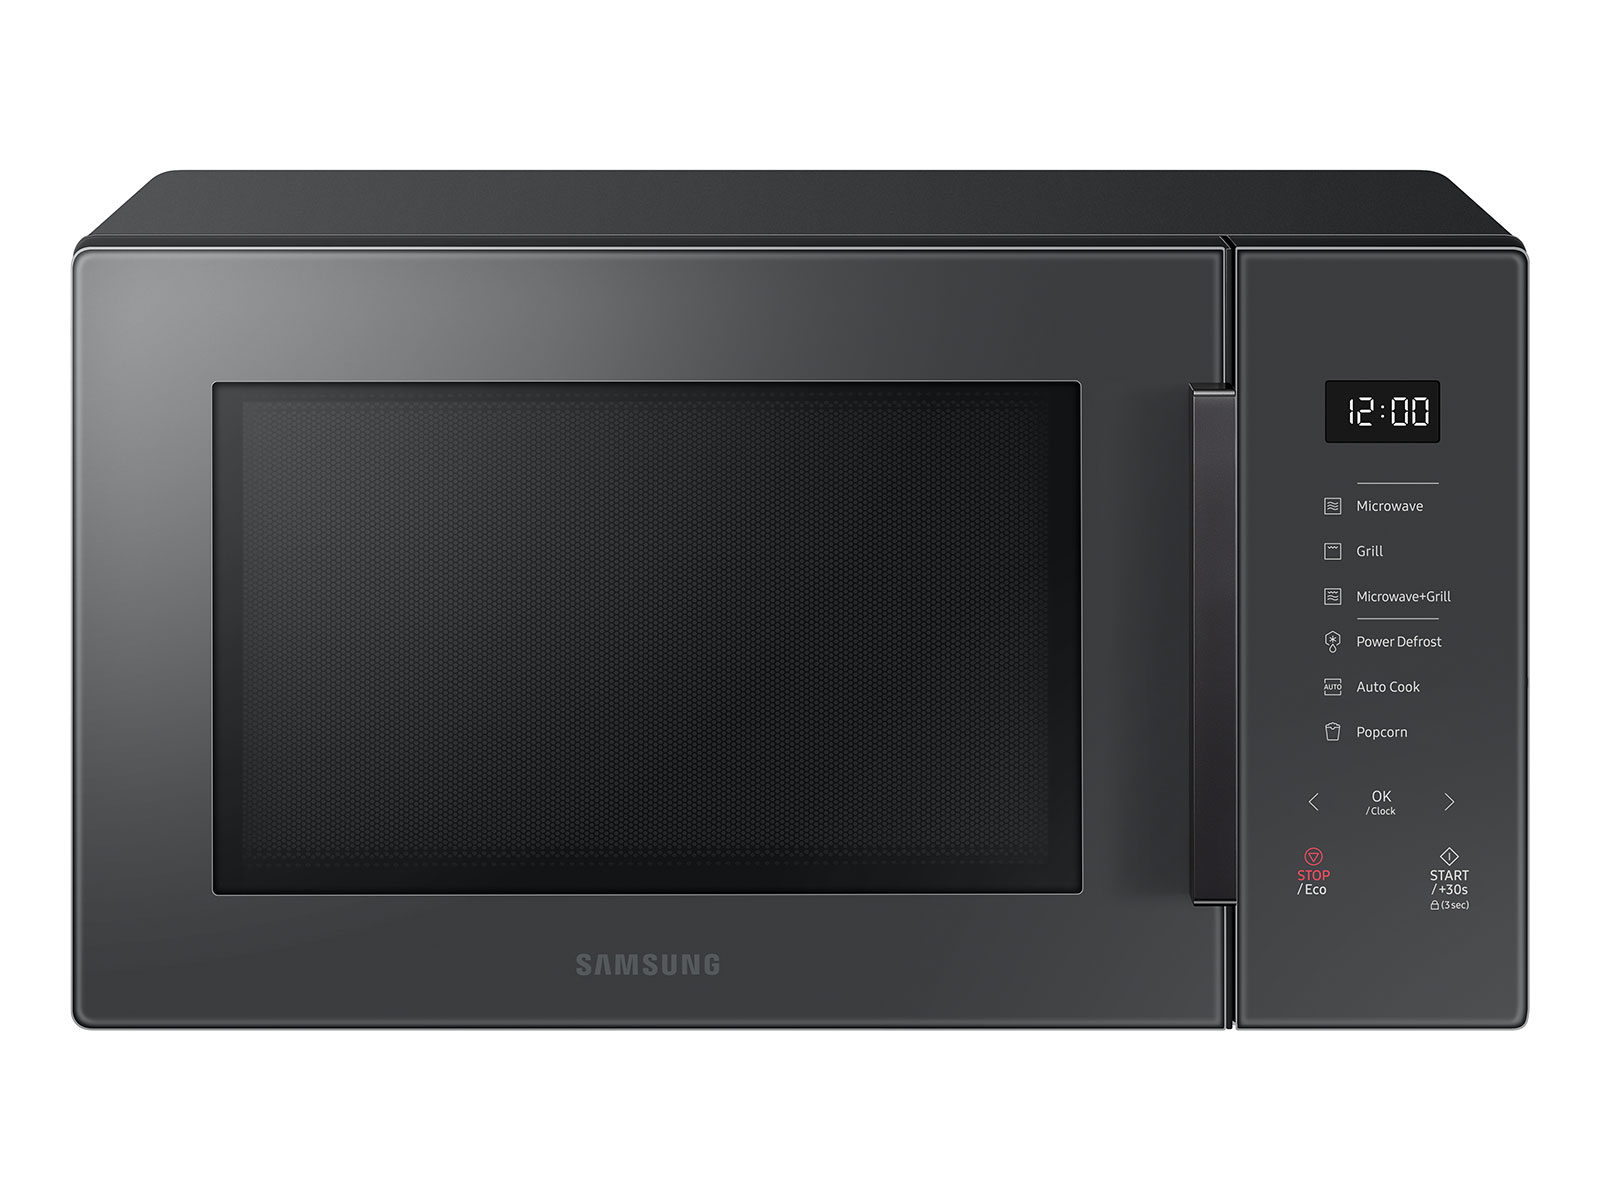 Samsung 1.1 cu. Ft. Countertop Microwave with Grilling Element $169 + Free Shipping